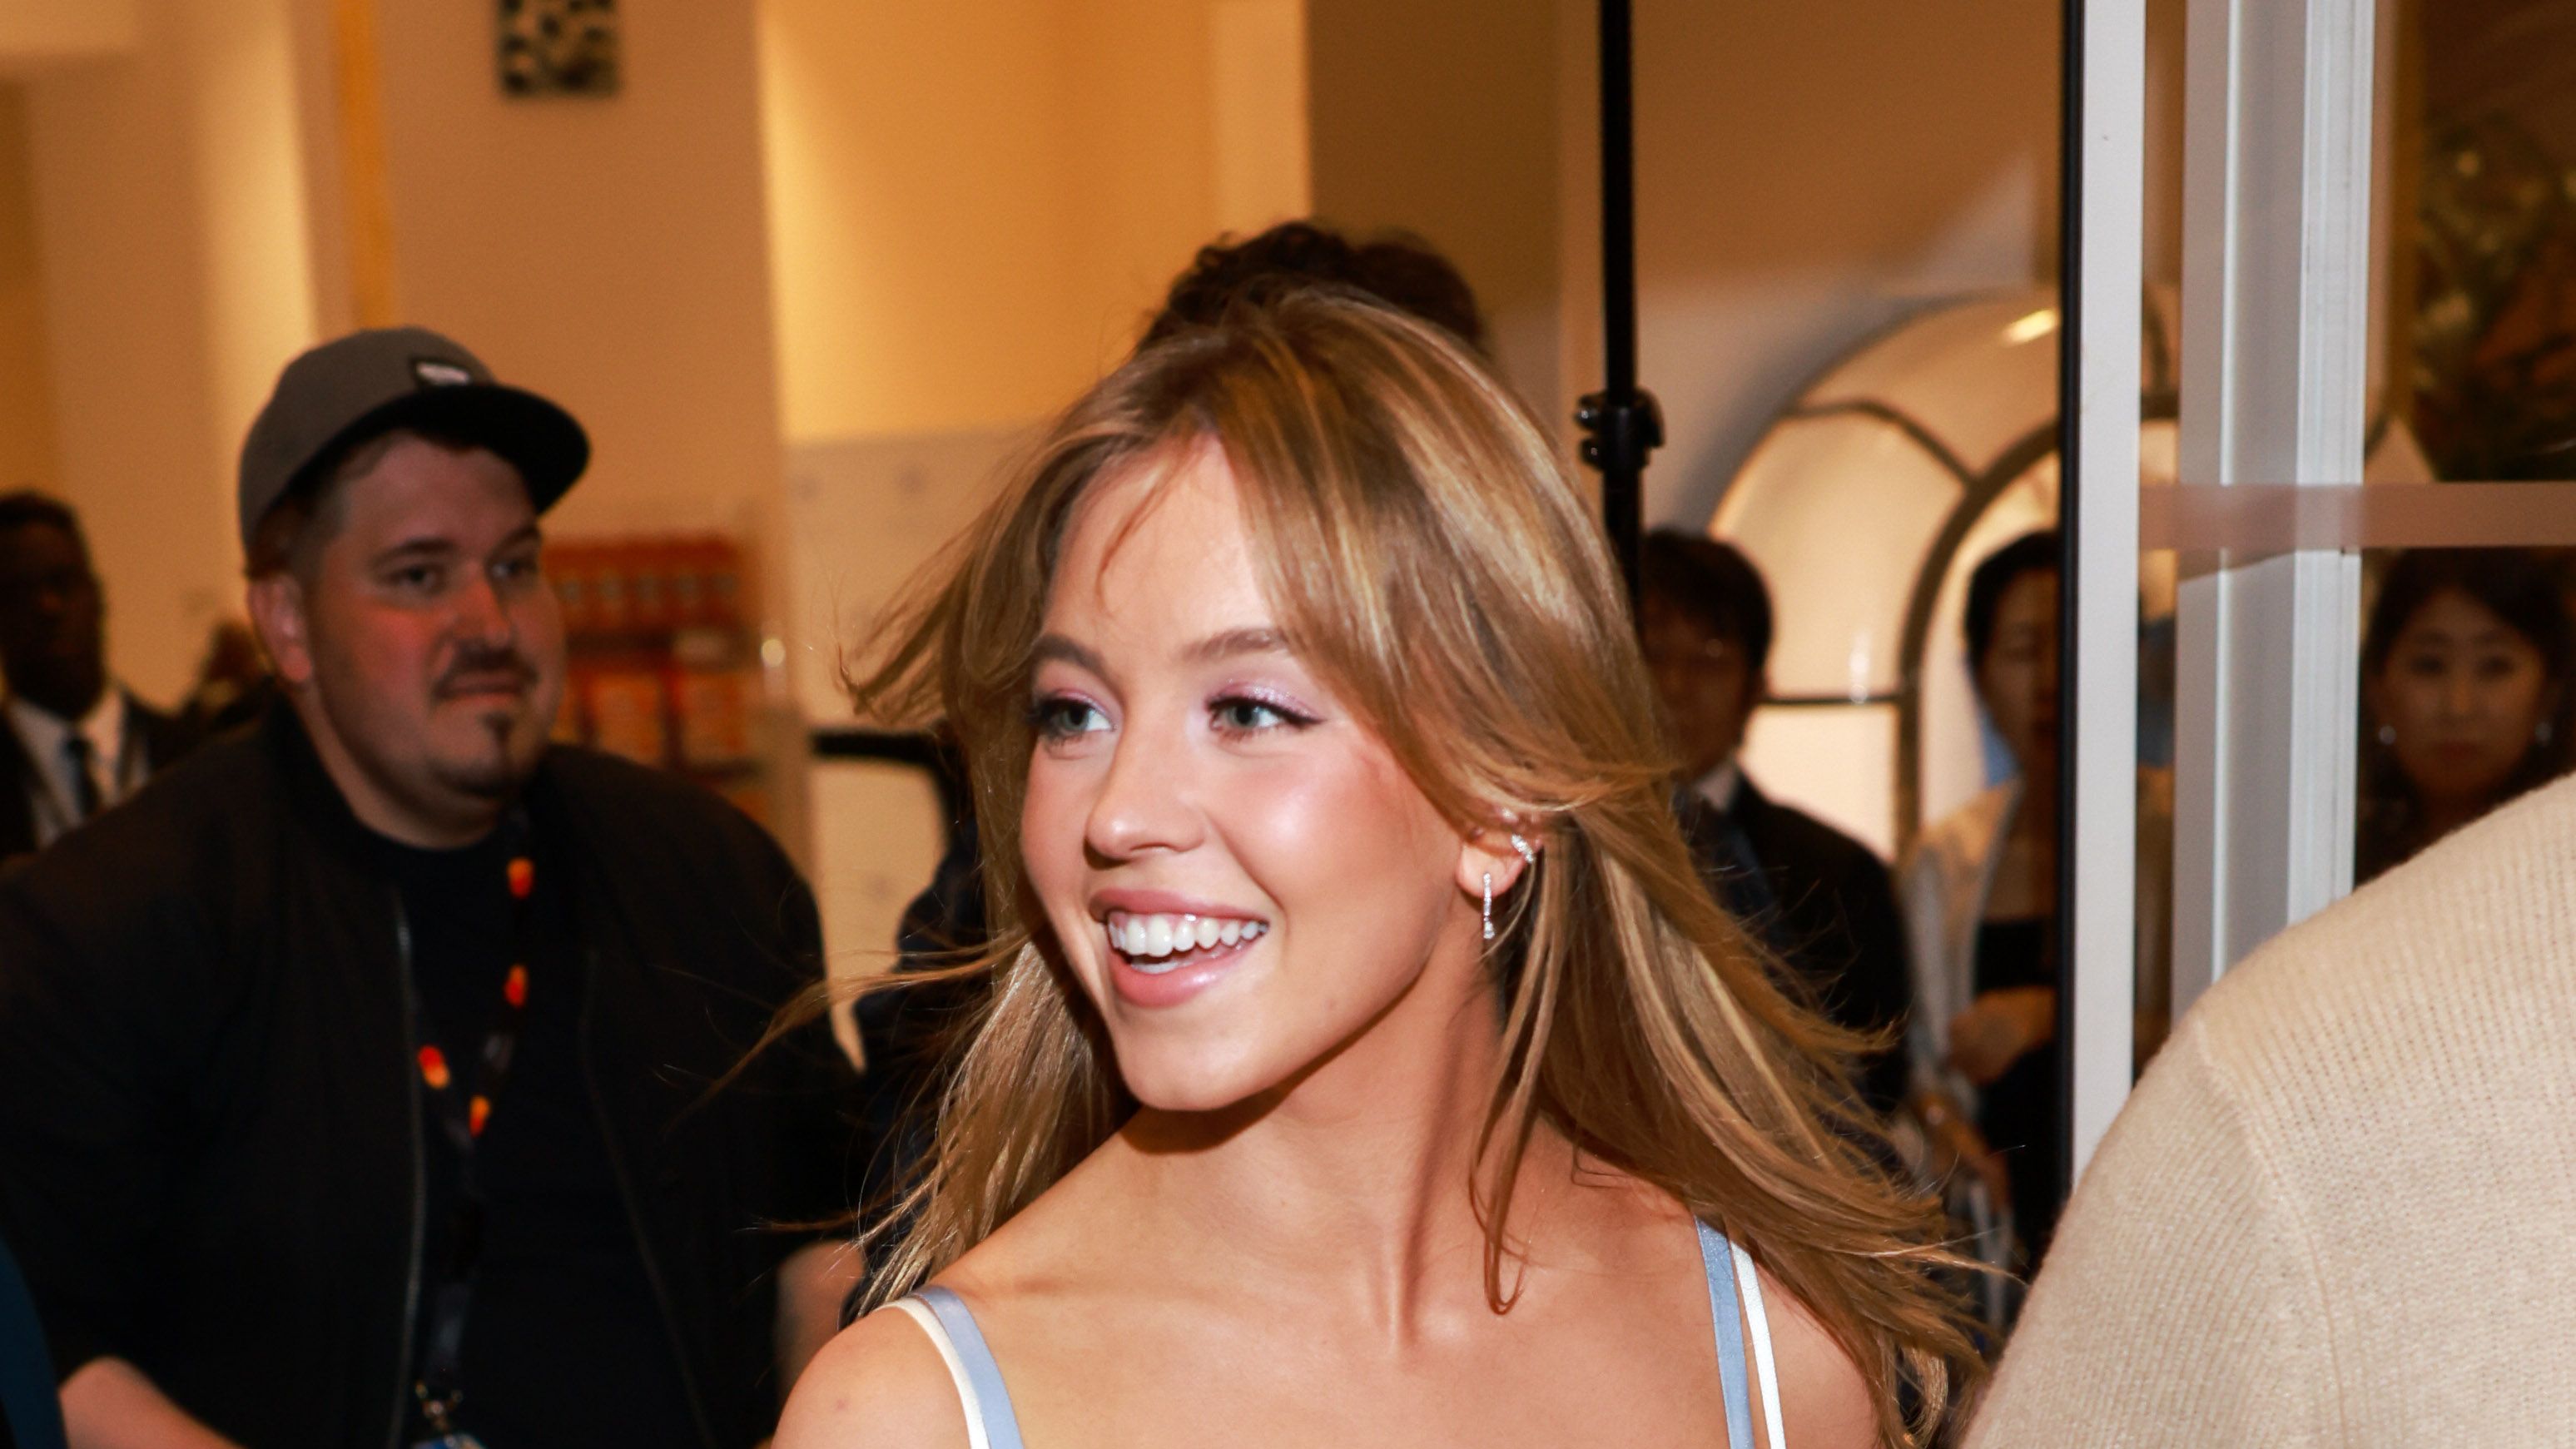 Sydney Sweeney Slays With Chiseled Abs In A Bra Top In Cannes Pics